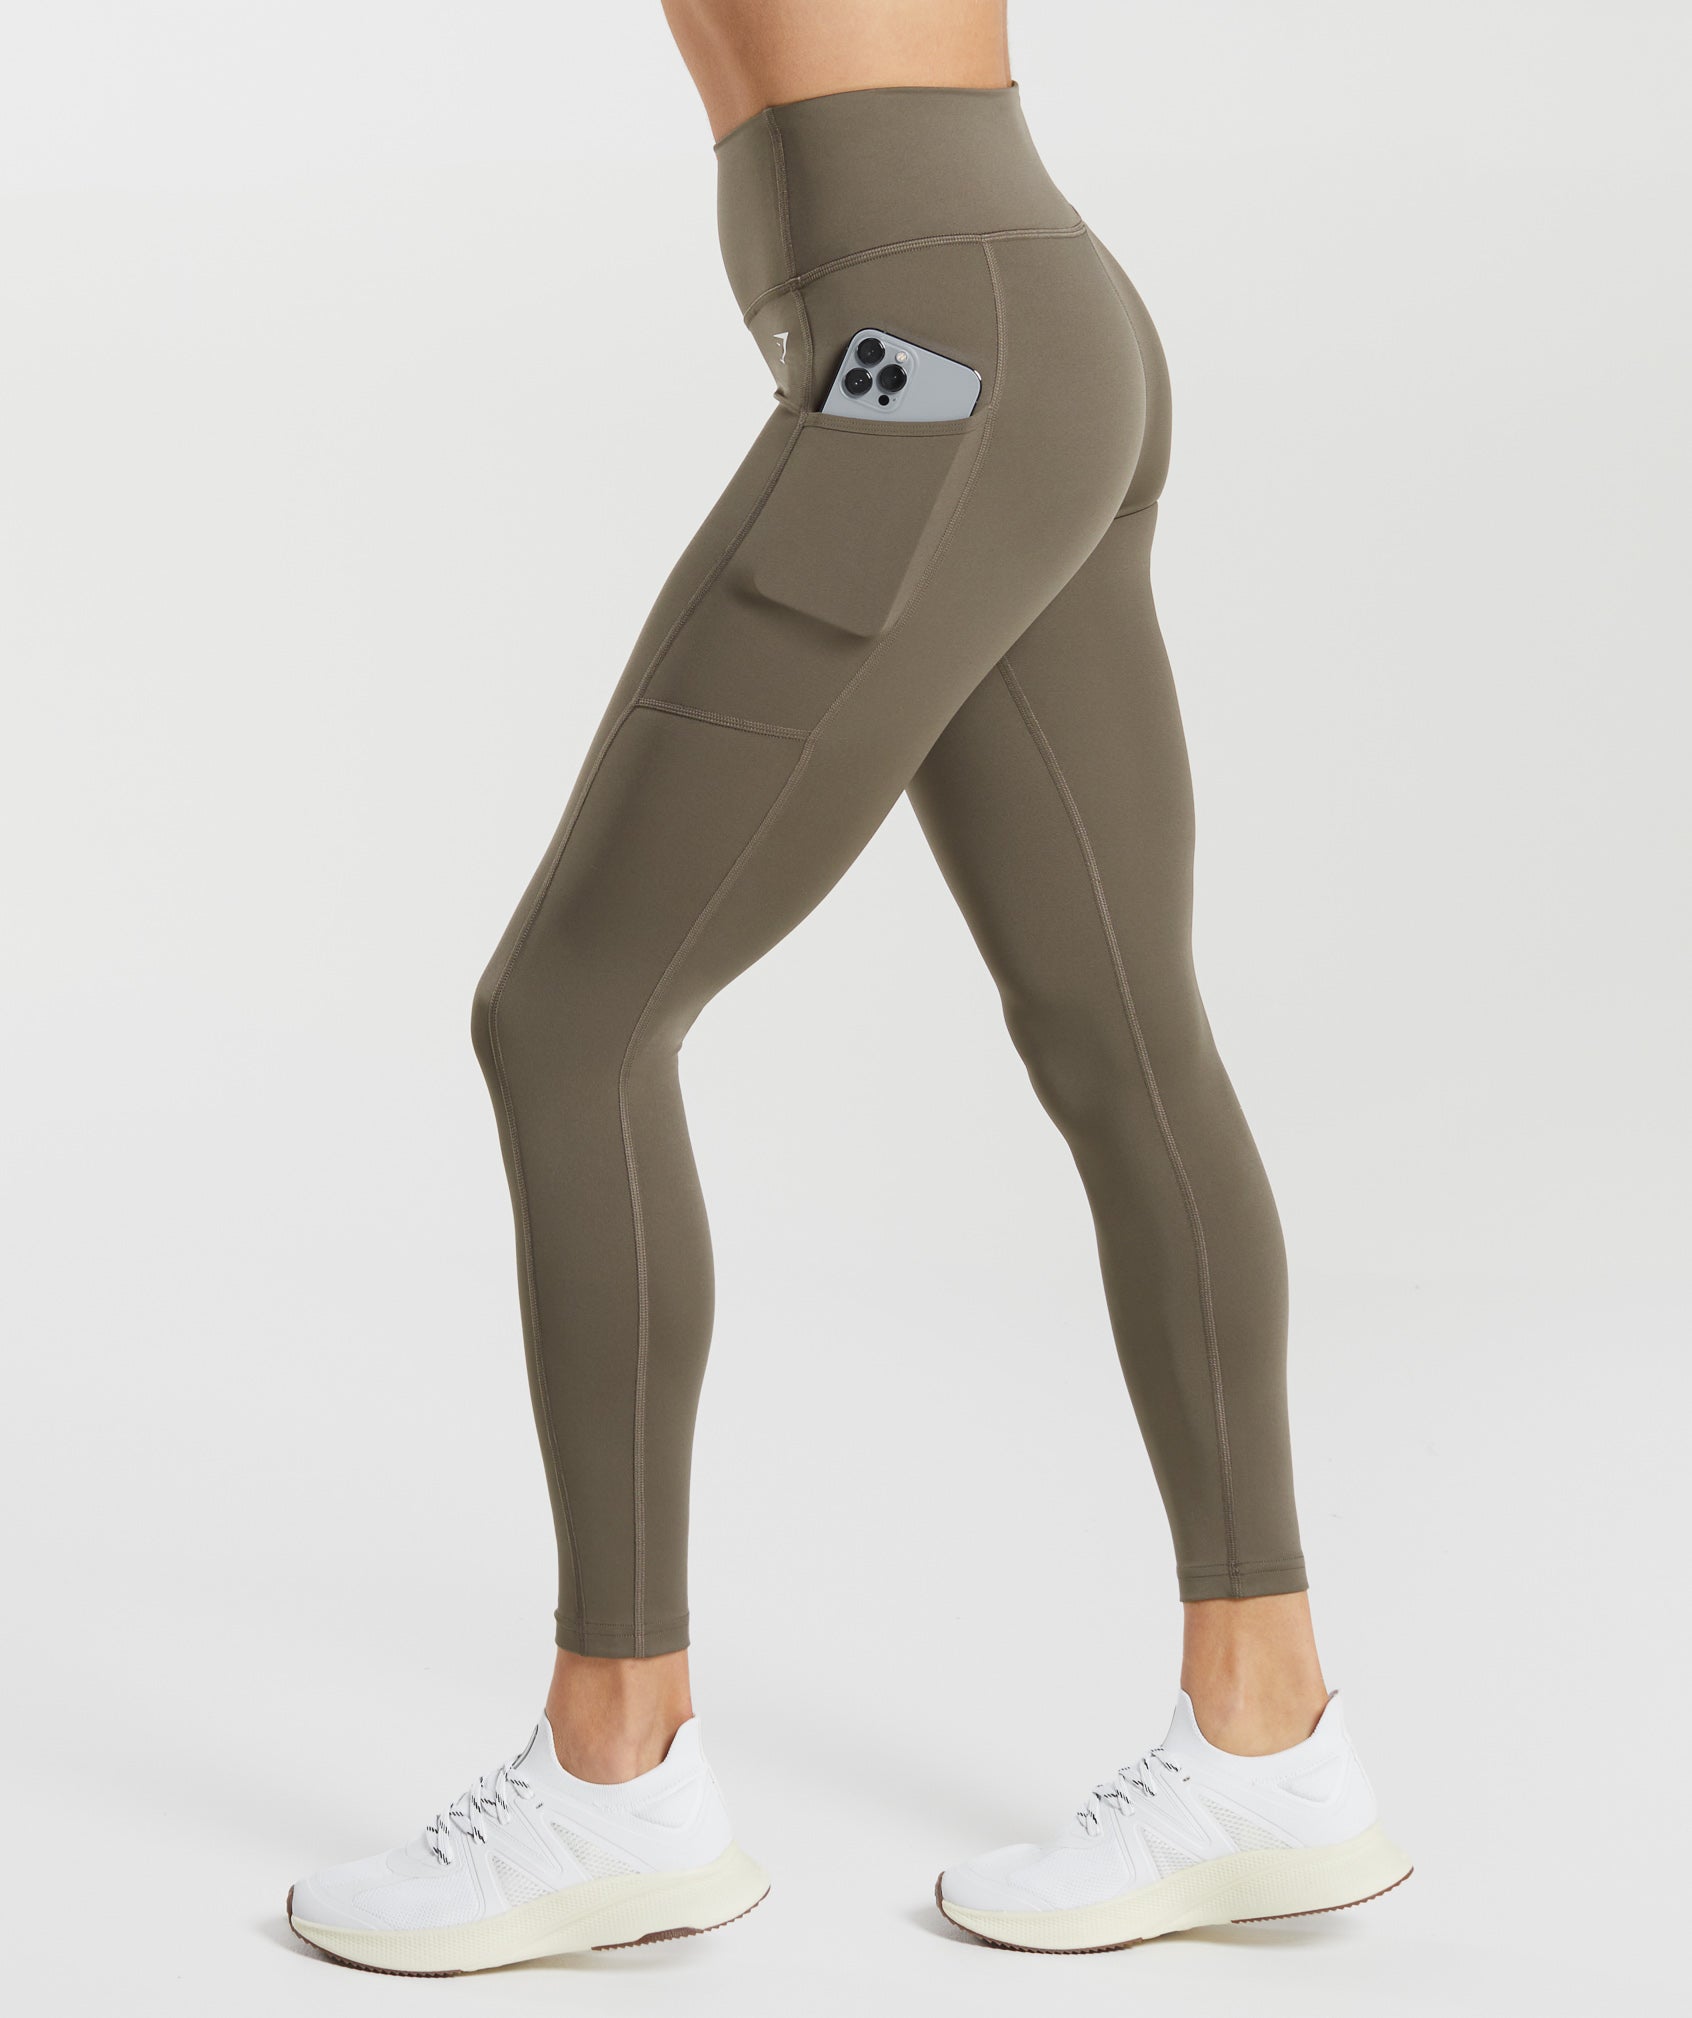 Pocket Leggings in {{variantColor} is out of stock